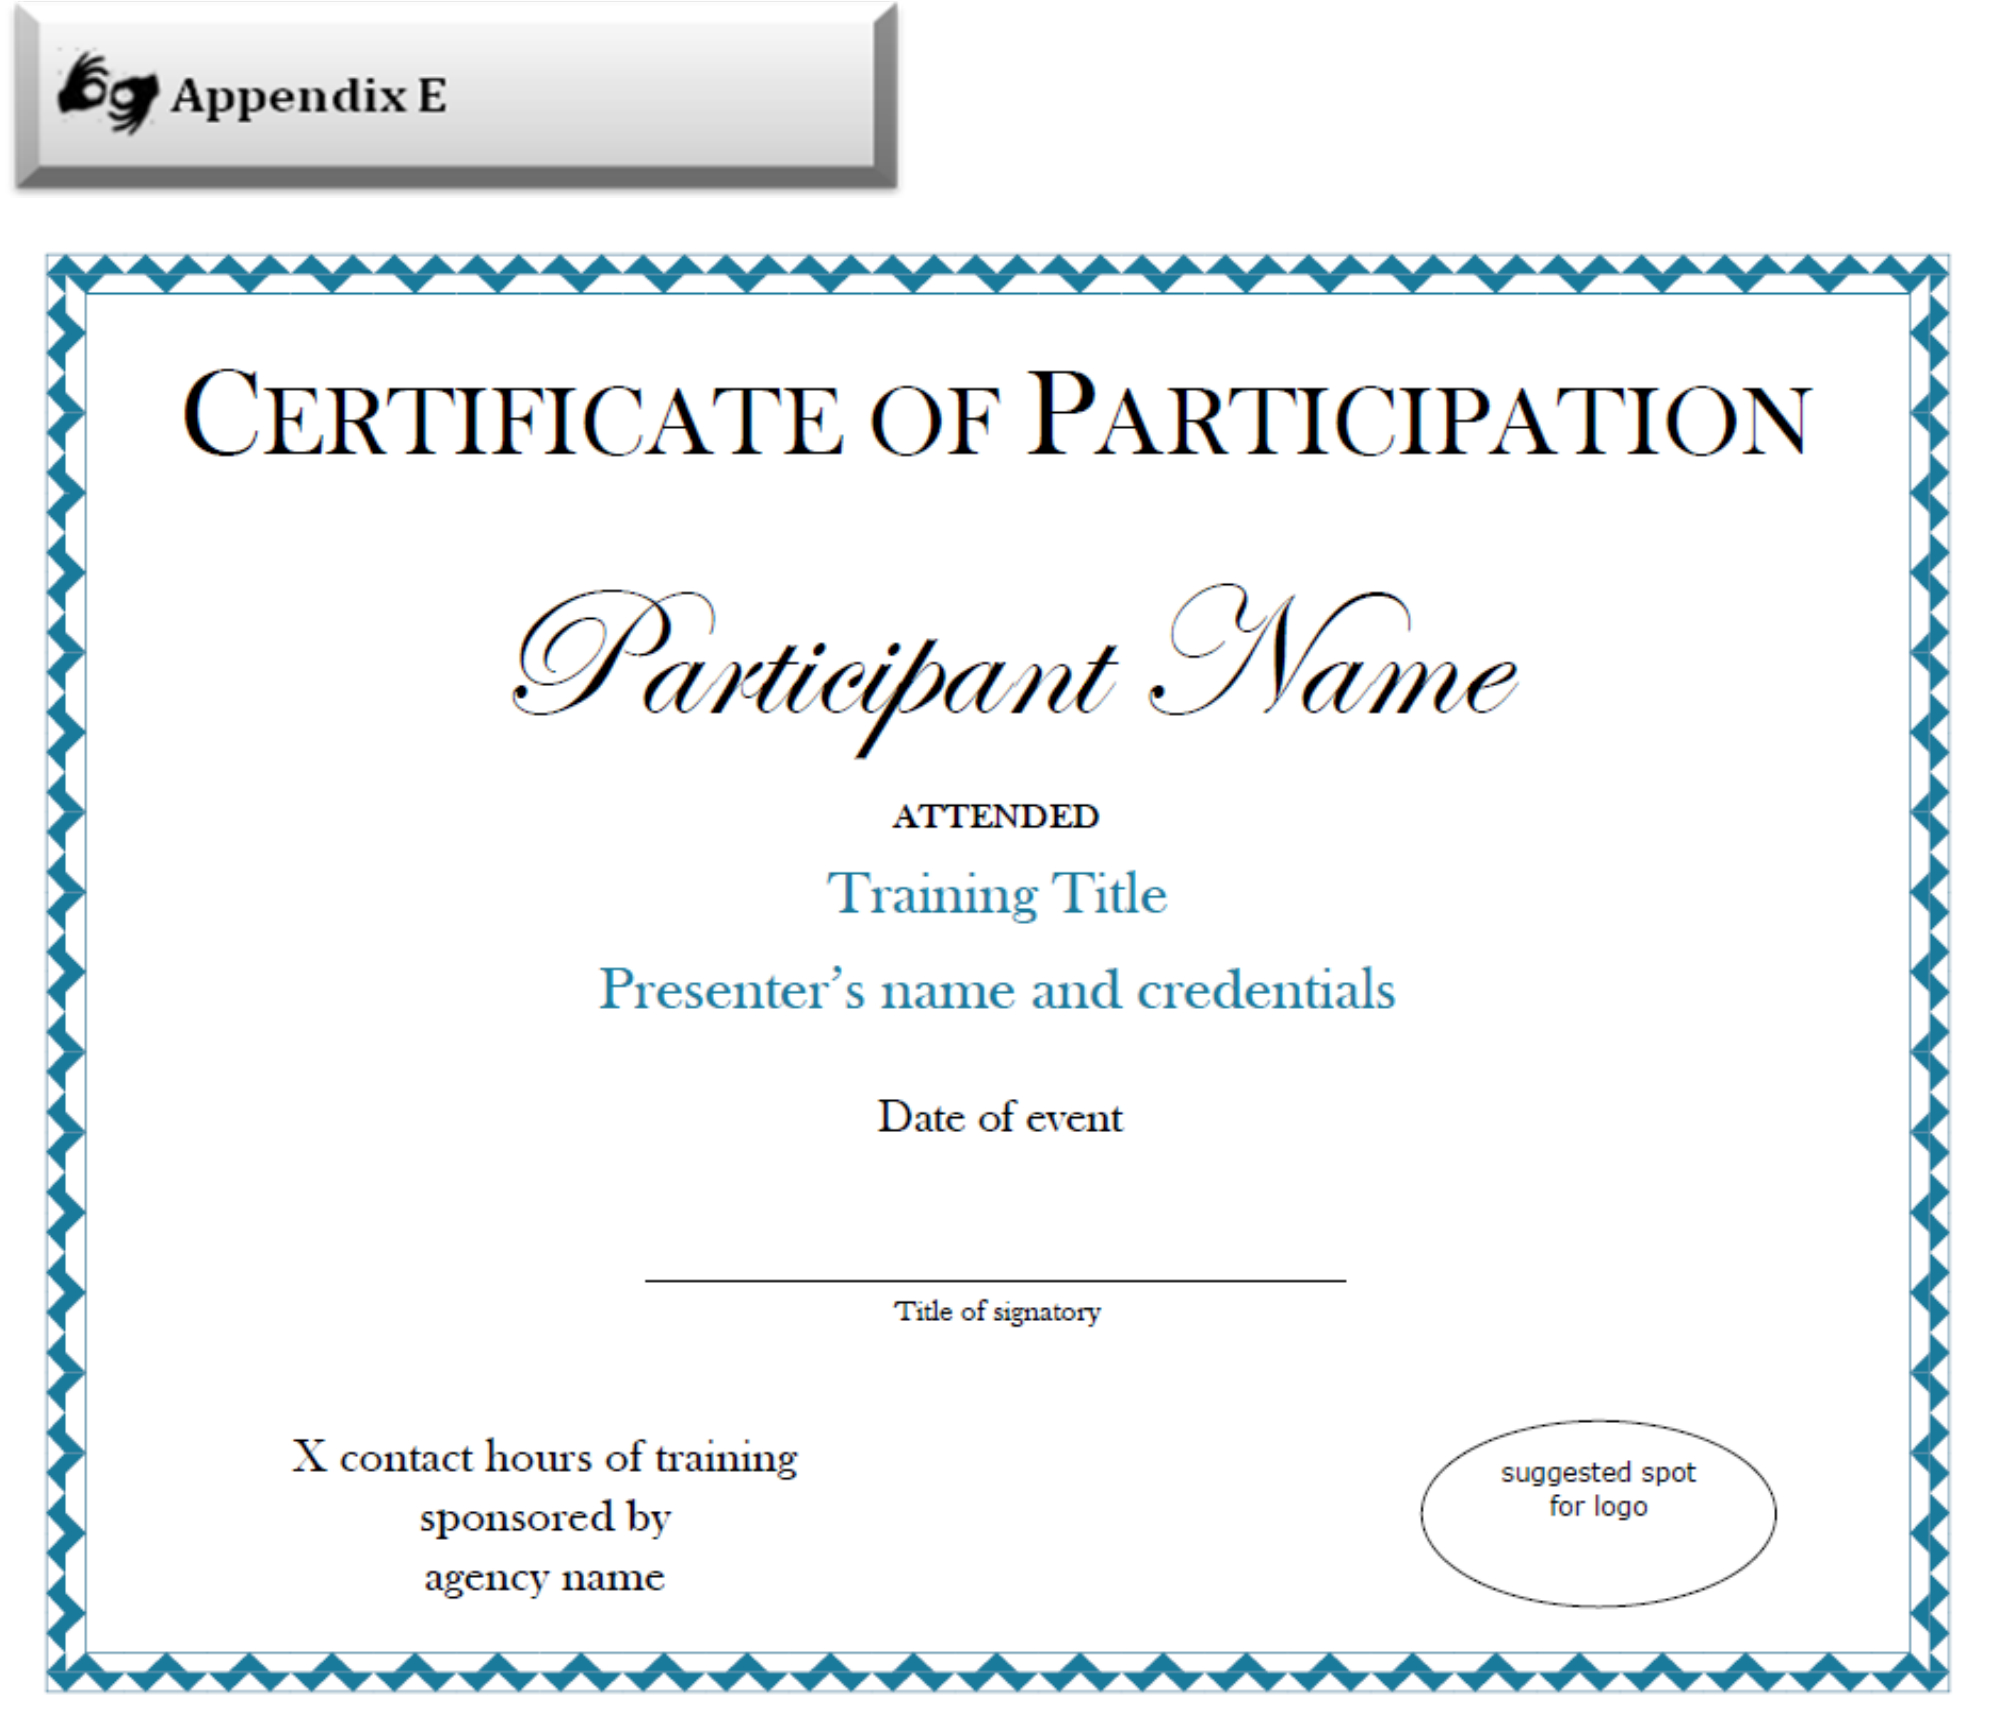 Certificate Of Participation Sample Free Download Pertaining To Certificate Of Participation Template Pdf